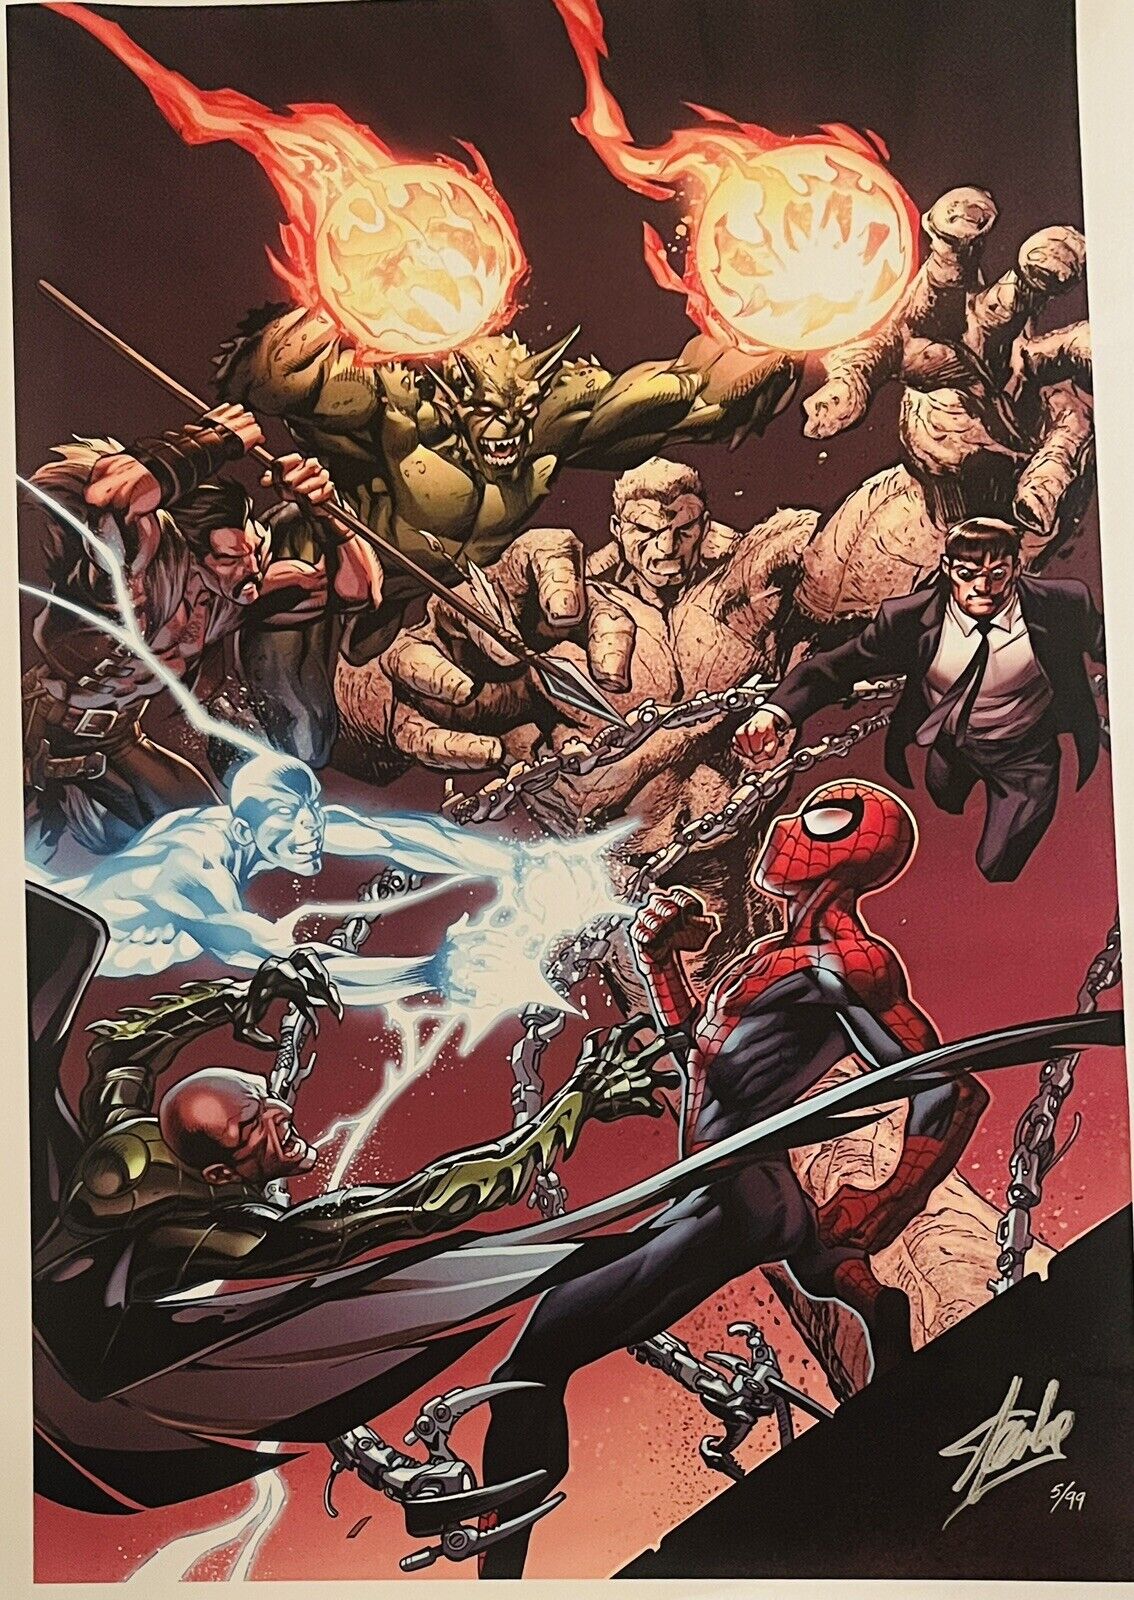 Stan Lee Signed “Ultimate Spiderman #158, Giclee On Canvas. LIMITED EDITION